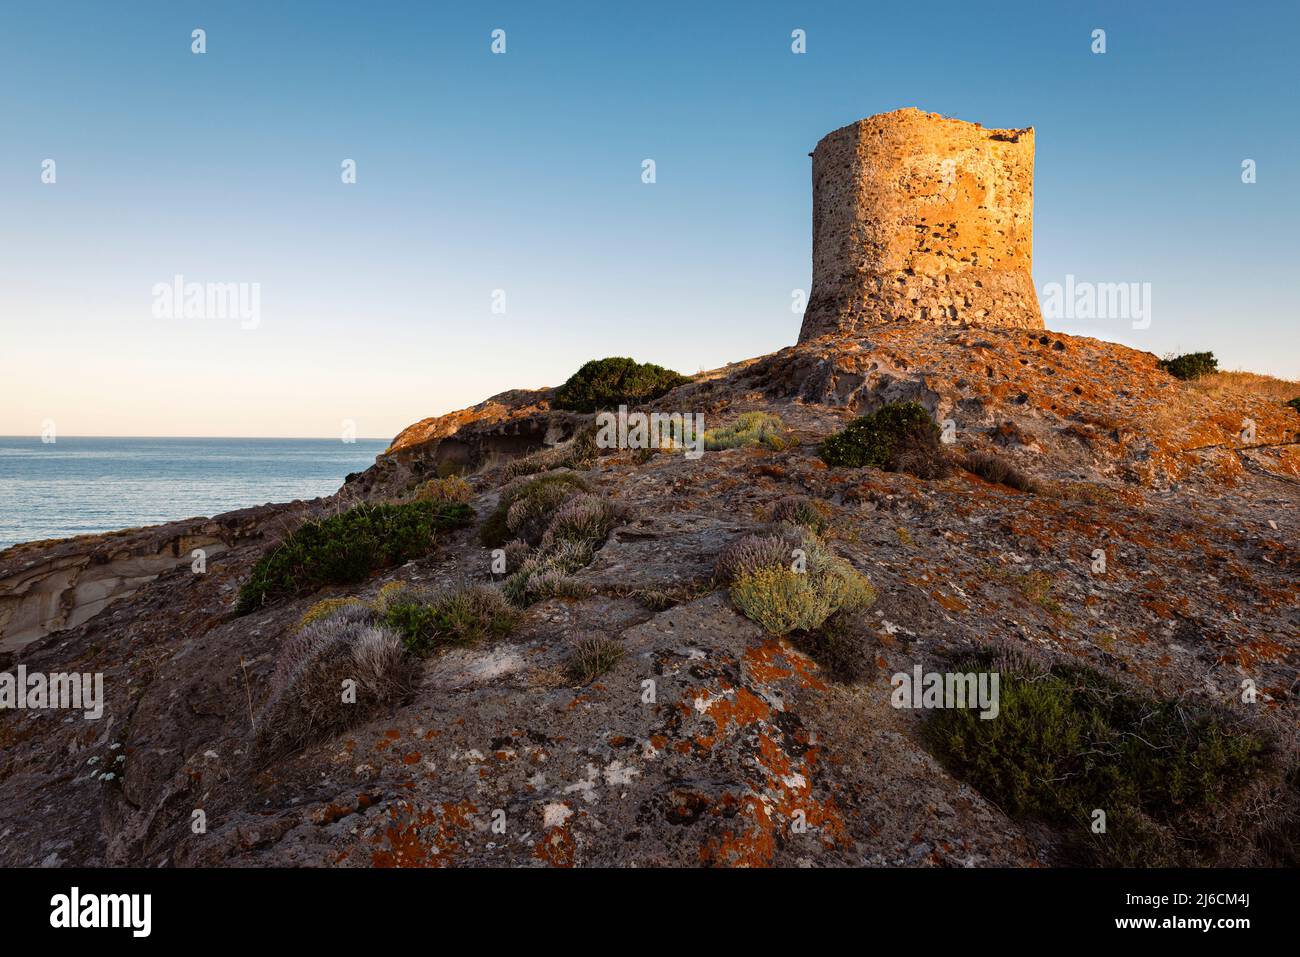 Nature experience - Ruins of the old coastal watchtower Torre Argentina on a rock above the west coast of Sardinia in the Mediterranean Sea at sunrise Stock Photo